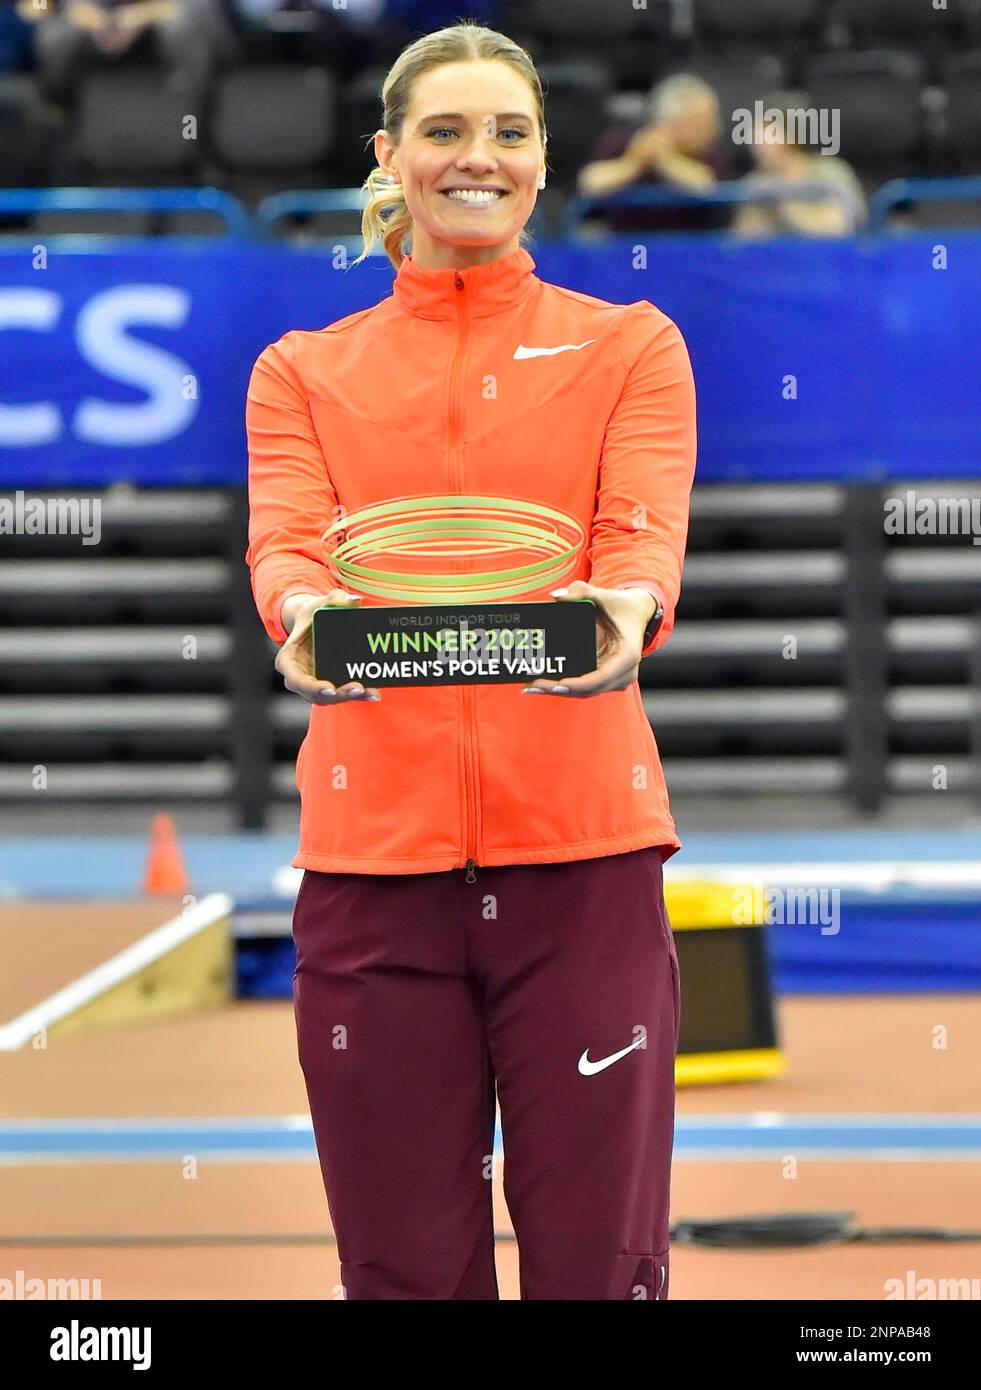 Birmingham, UK, 25 February 2023: Alysha Newman  with her trophy for winning the women's pole vault series during the athletics World Indoor Tour Final 2023 Birmingham World Indoor Gold Tour Final  Utilita Arena, Birmingham on the 25 February , England Stock Photo